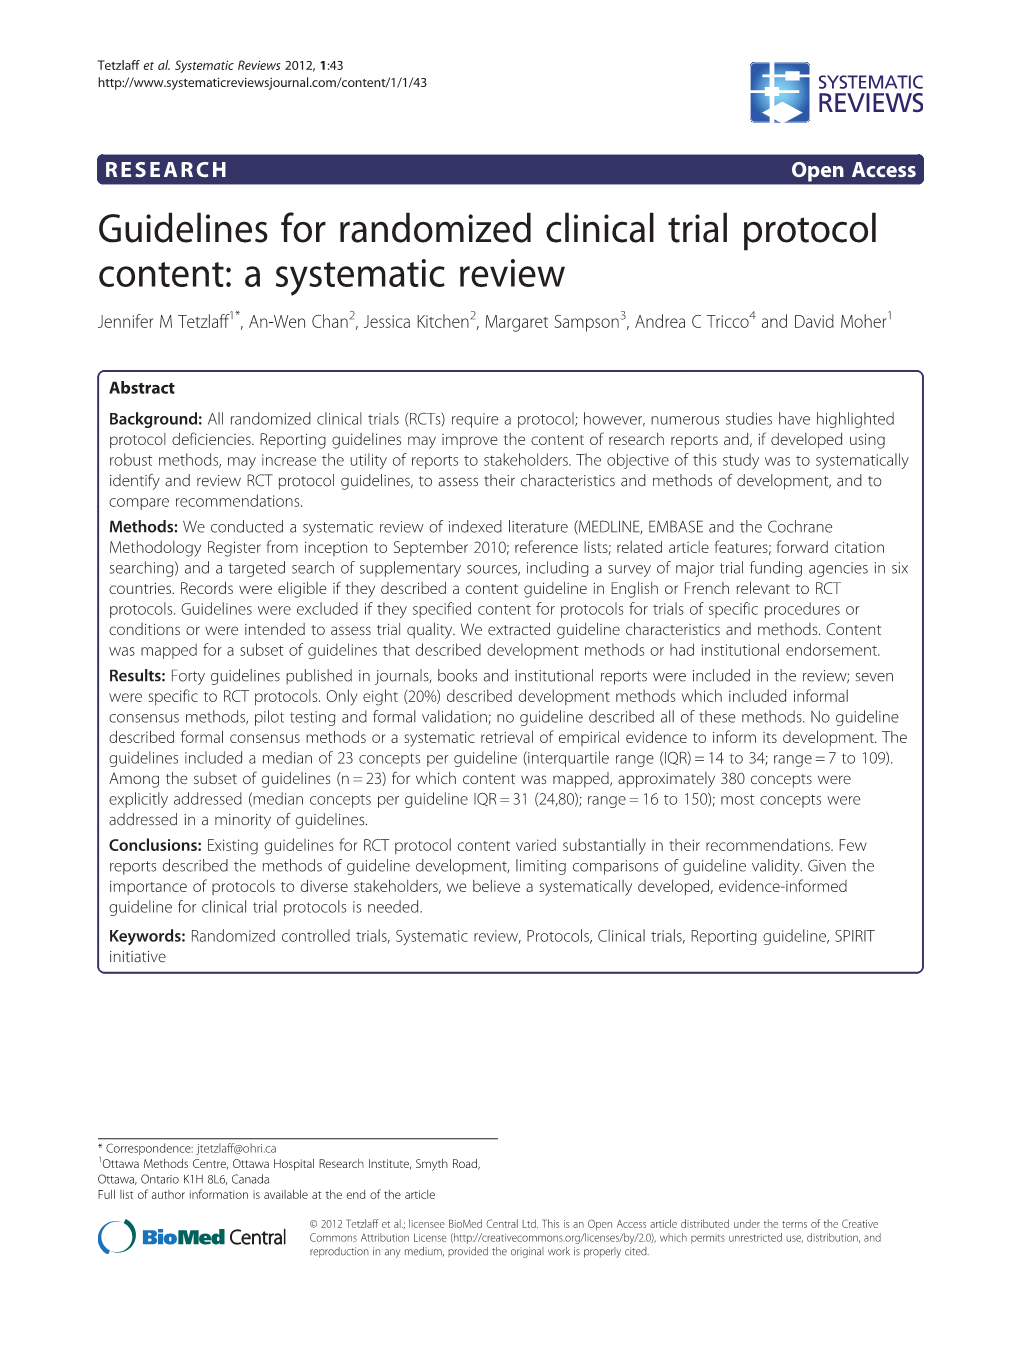 Guidelines for Randomized Clinical Trial Protocol Content: a Systematic Review